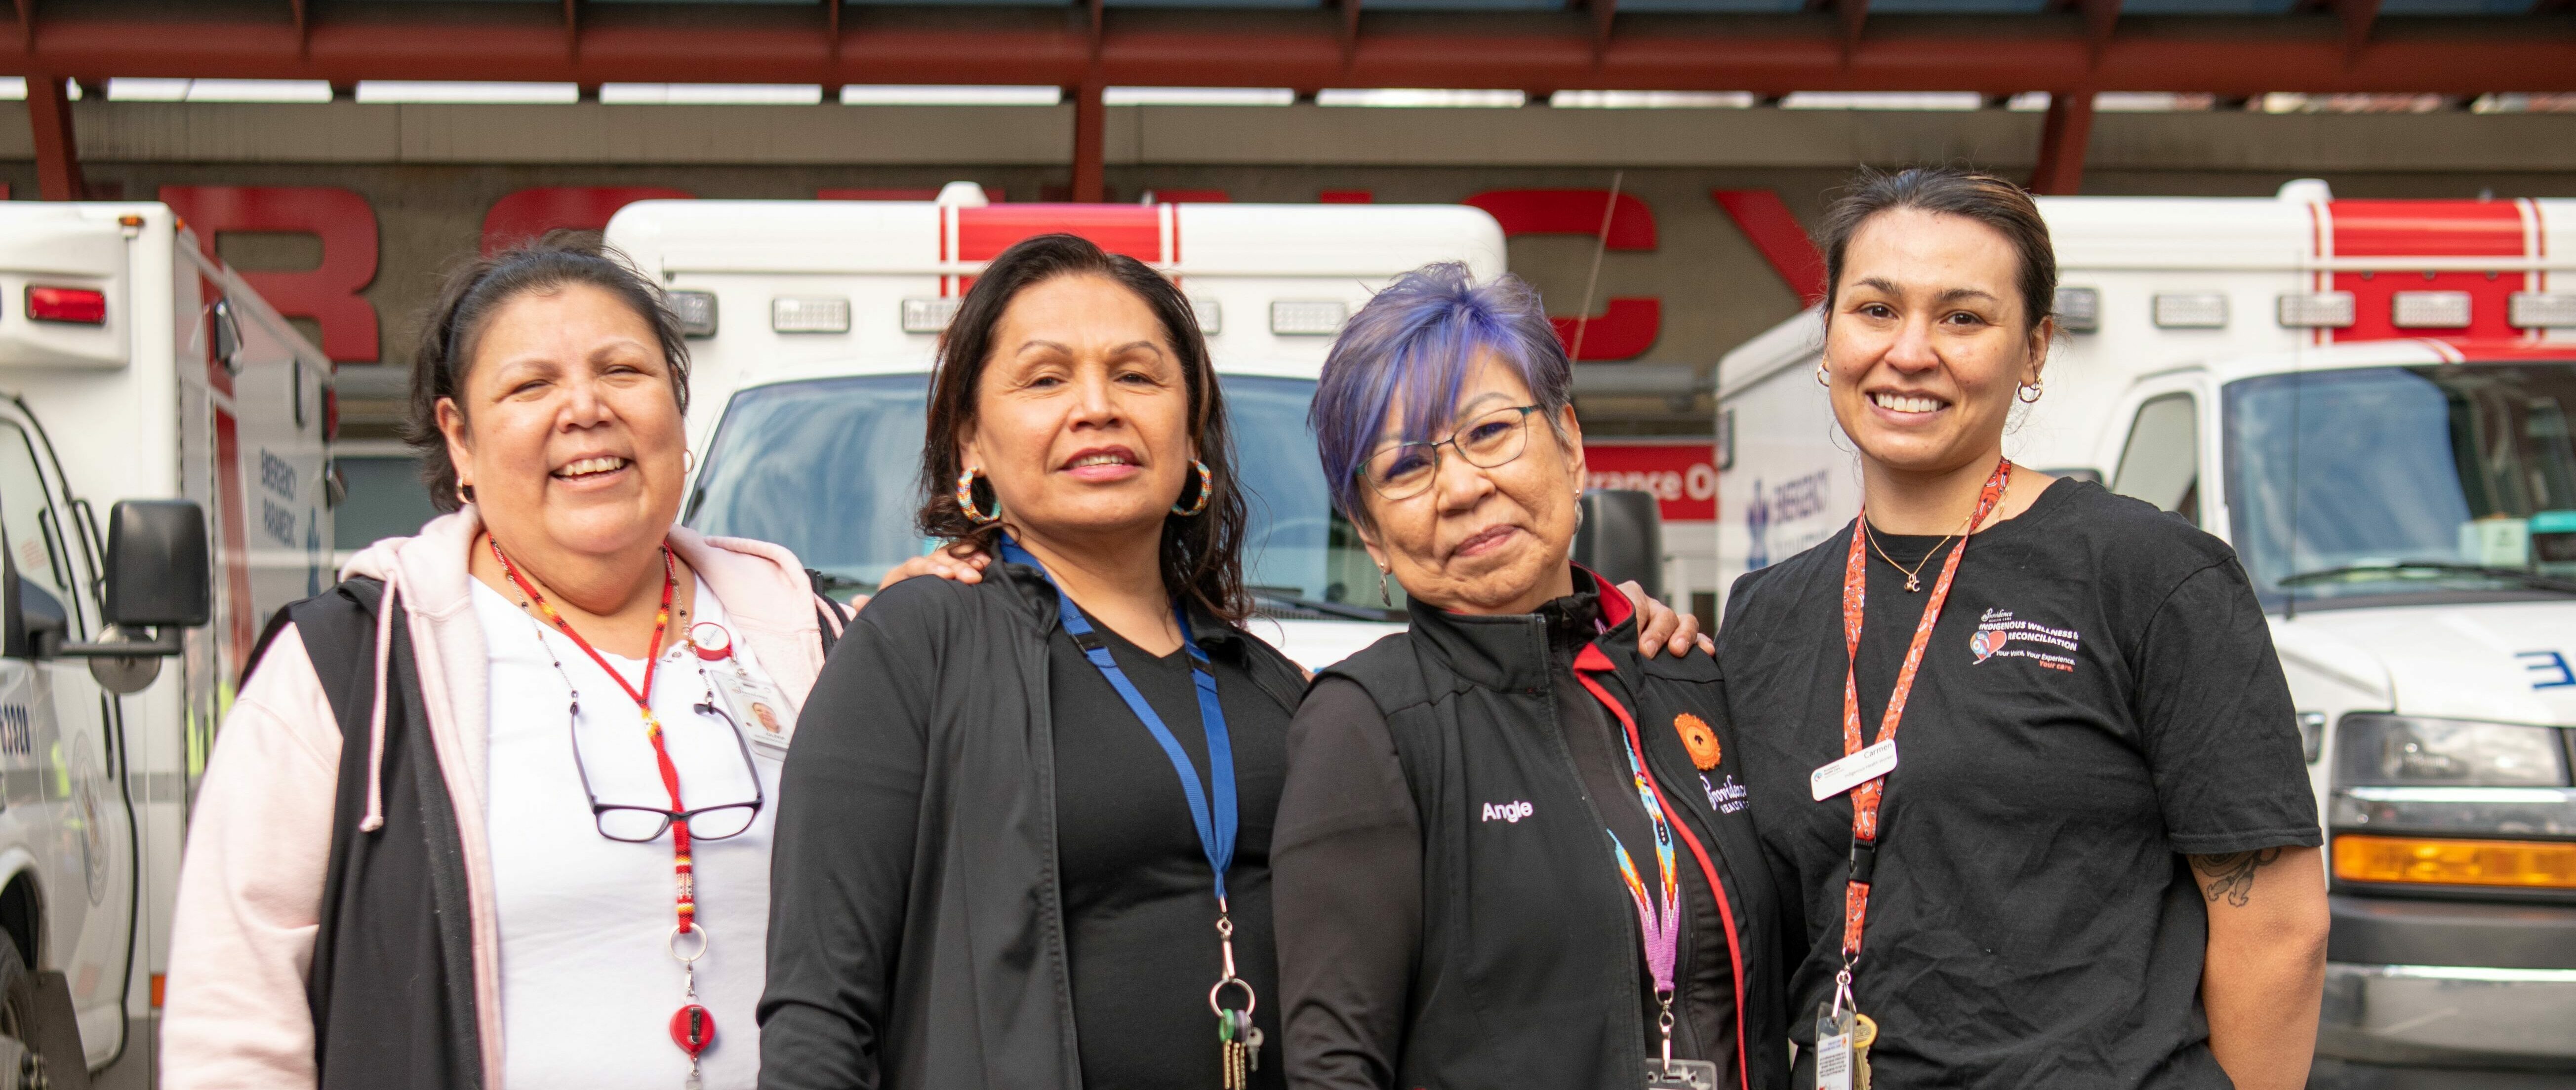 Indigenous wellness liaison who are pivotal to Indigenous health care at PHC